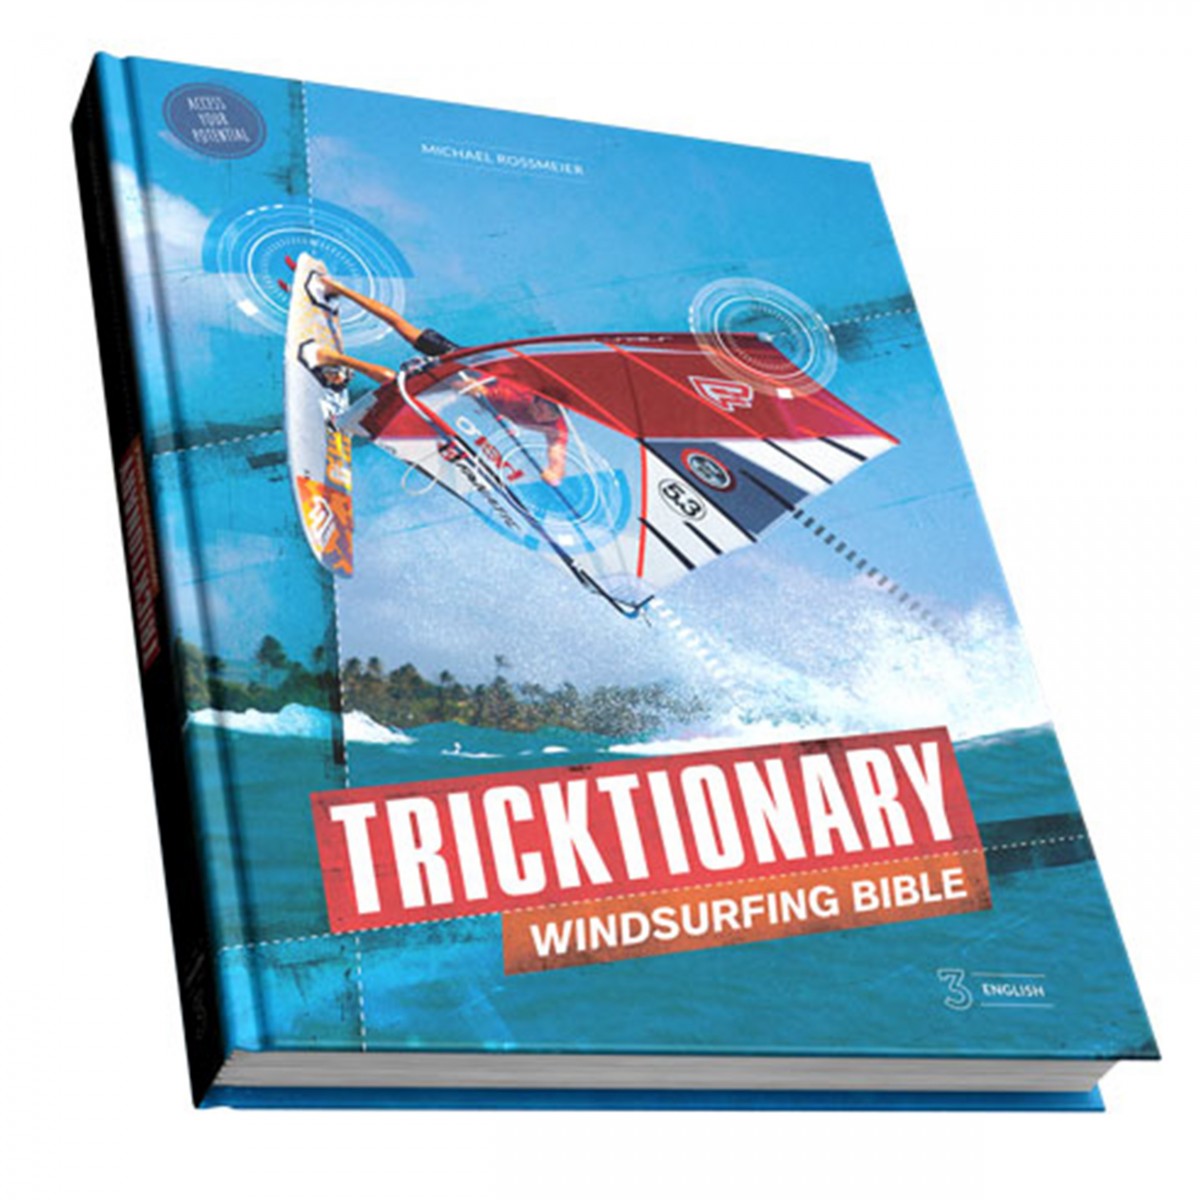 Tricktionary 3 Freestyle windsurf bible